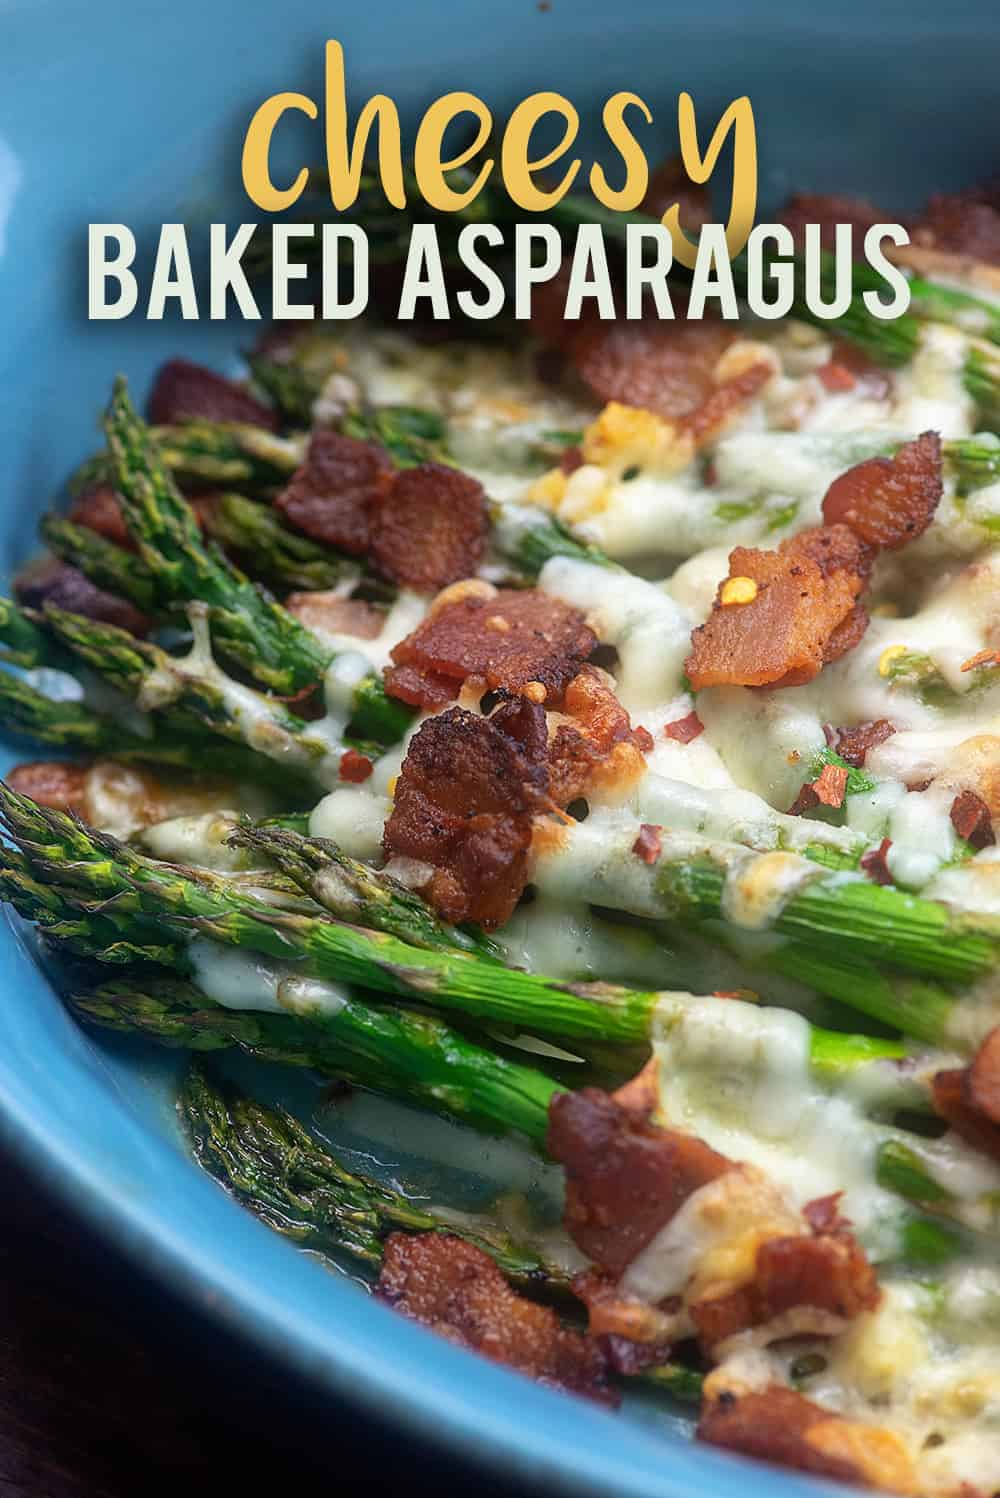 cheesy baked asparagus in blue dish.